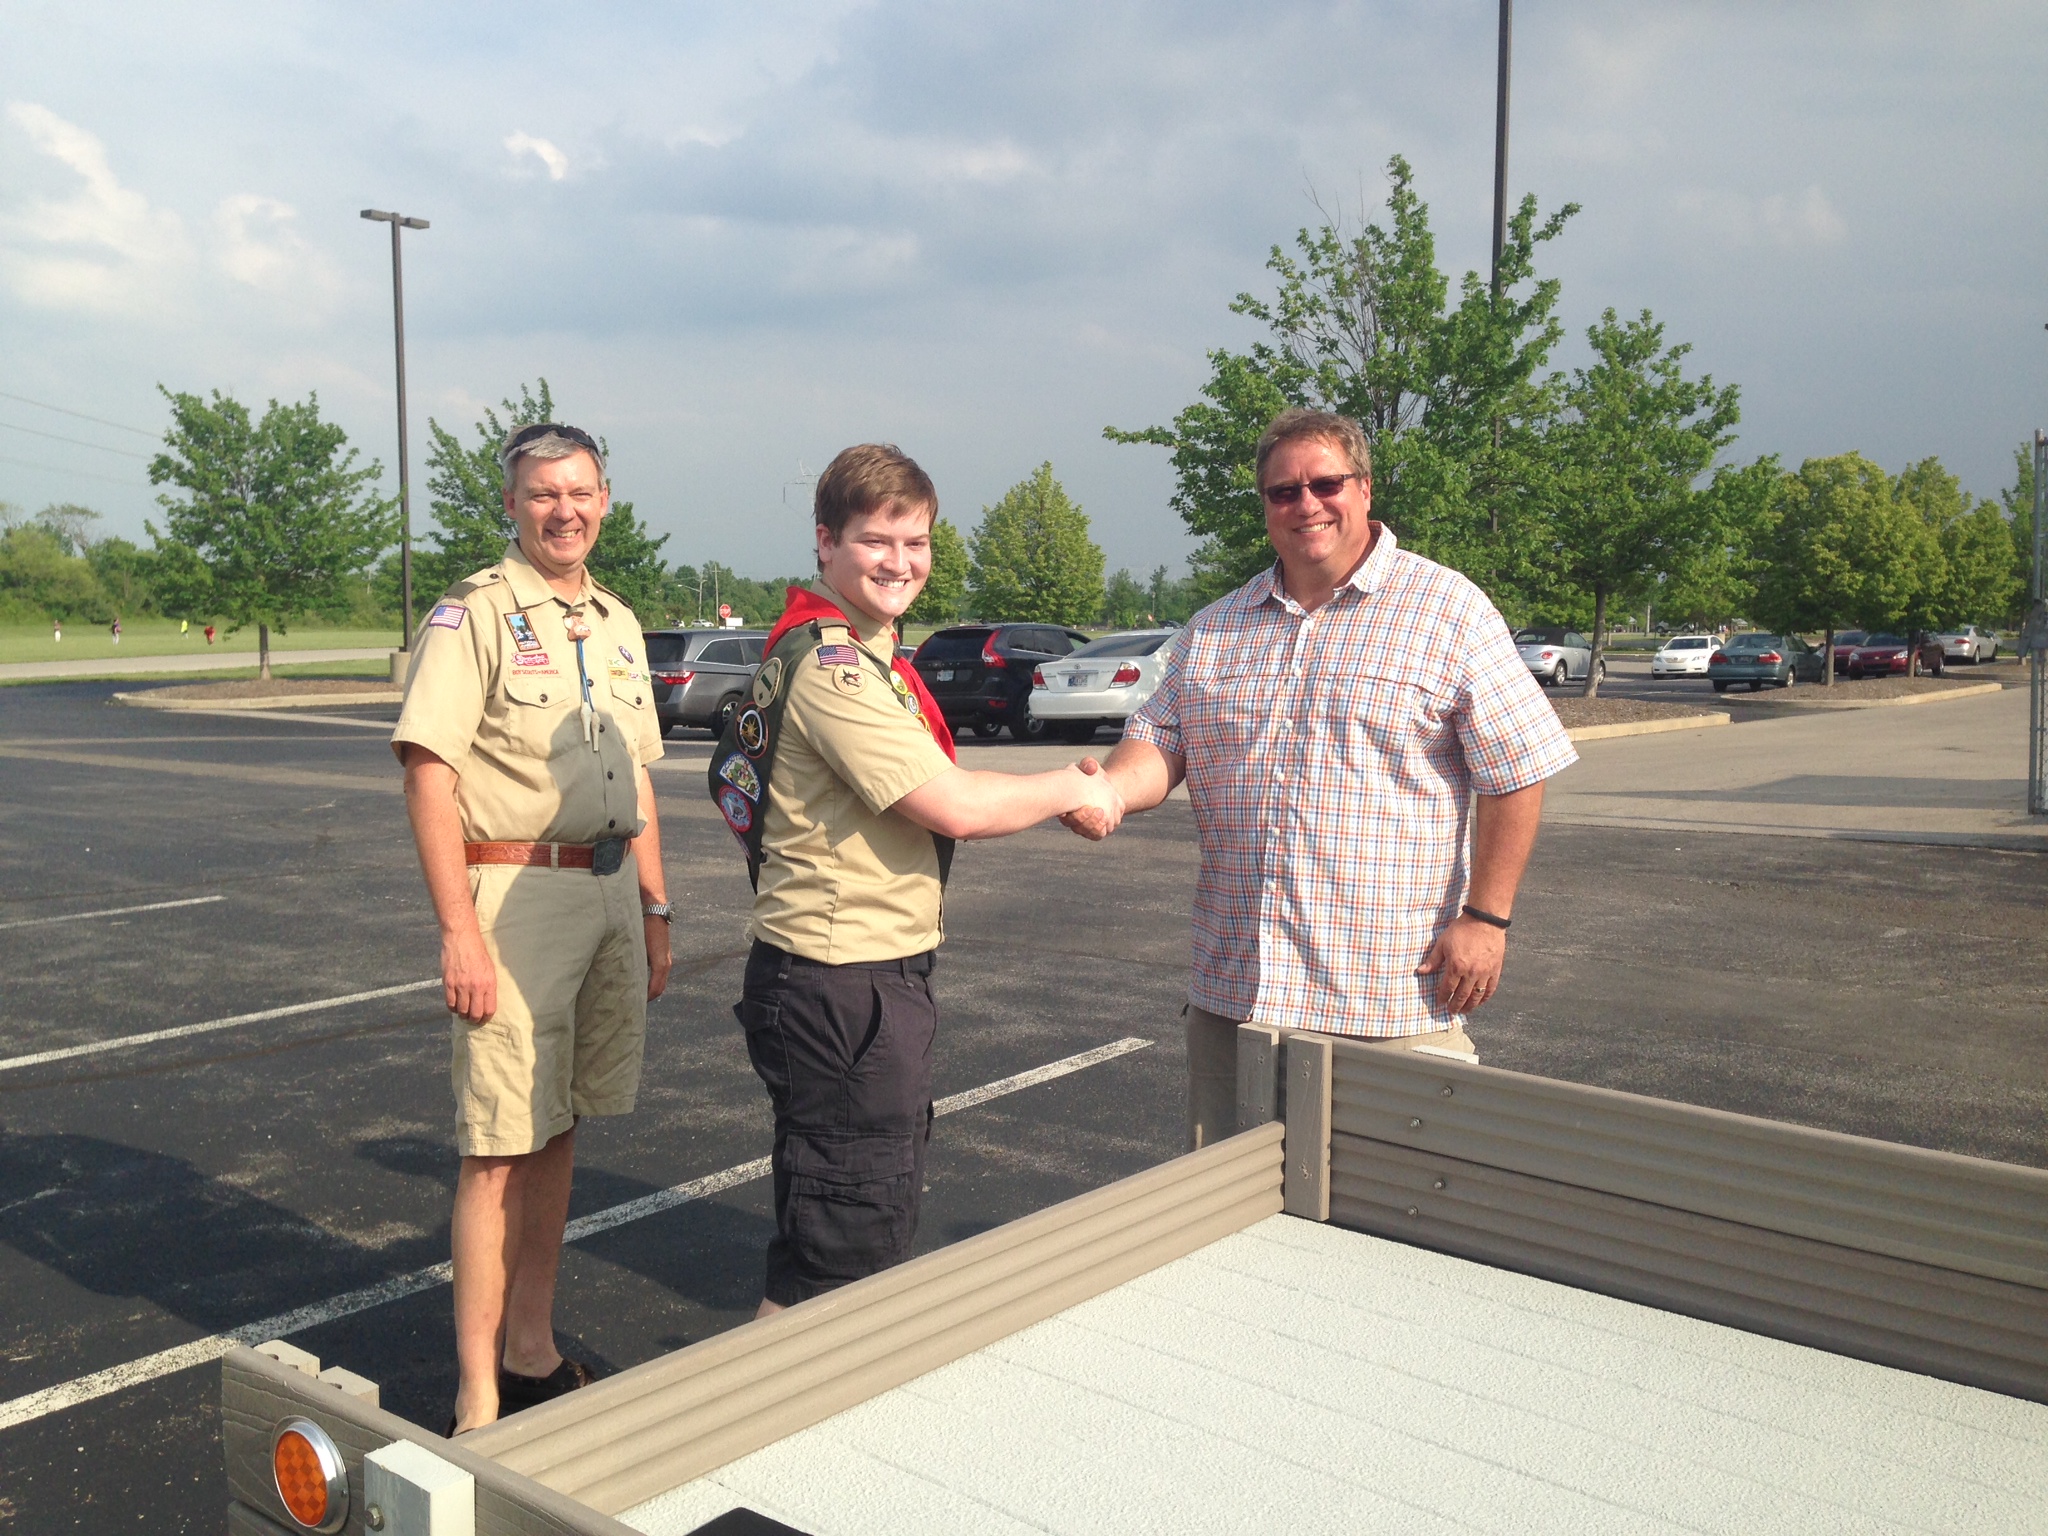 “I wanted to find a project that would benefit my church home,” said Ross Hill, who was just promoted to Eagle Scout. (Submitted photo)